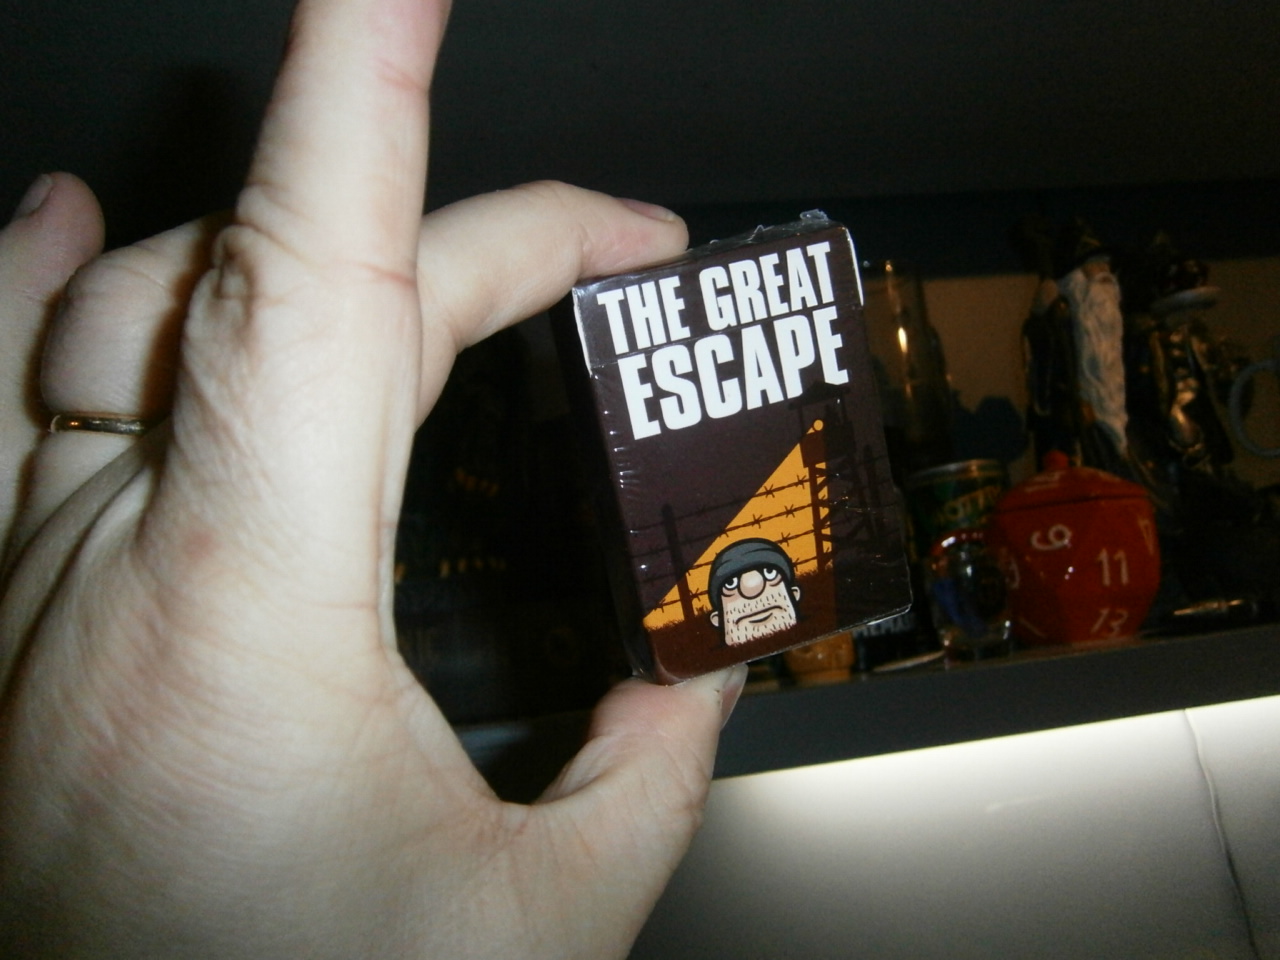 iTuesday Review: Prison Escape for iPhone - Galaxy of Geek